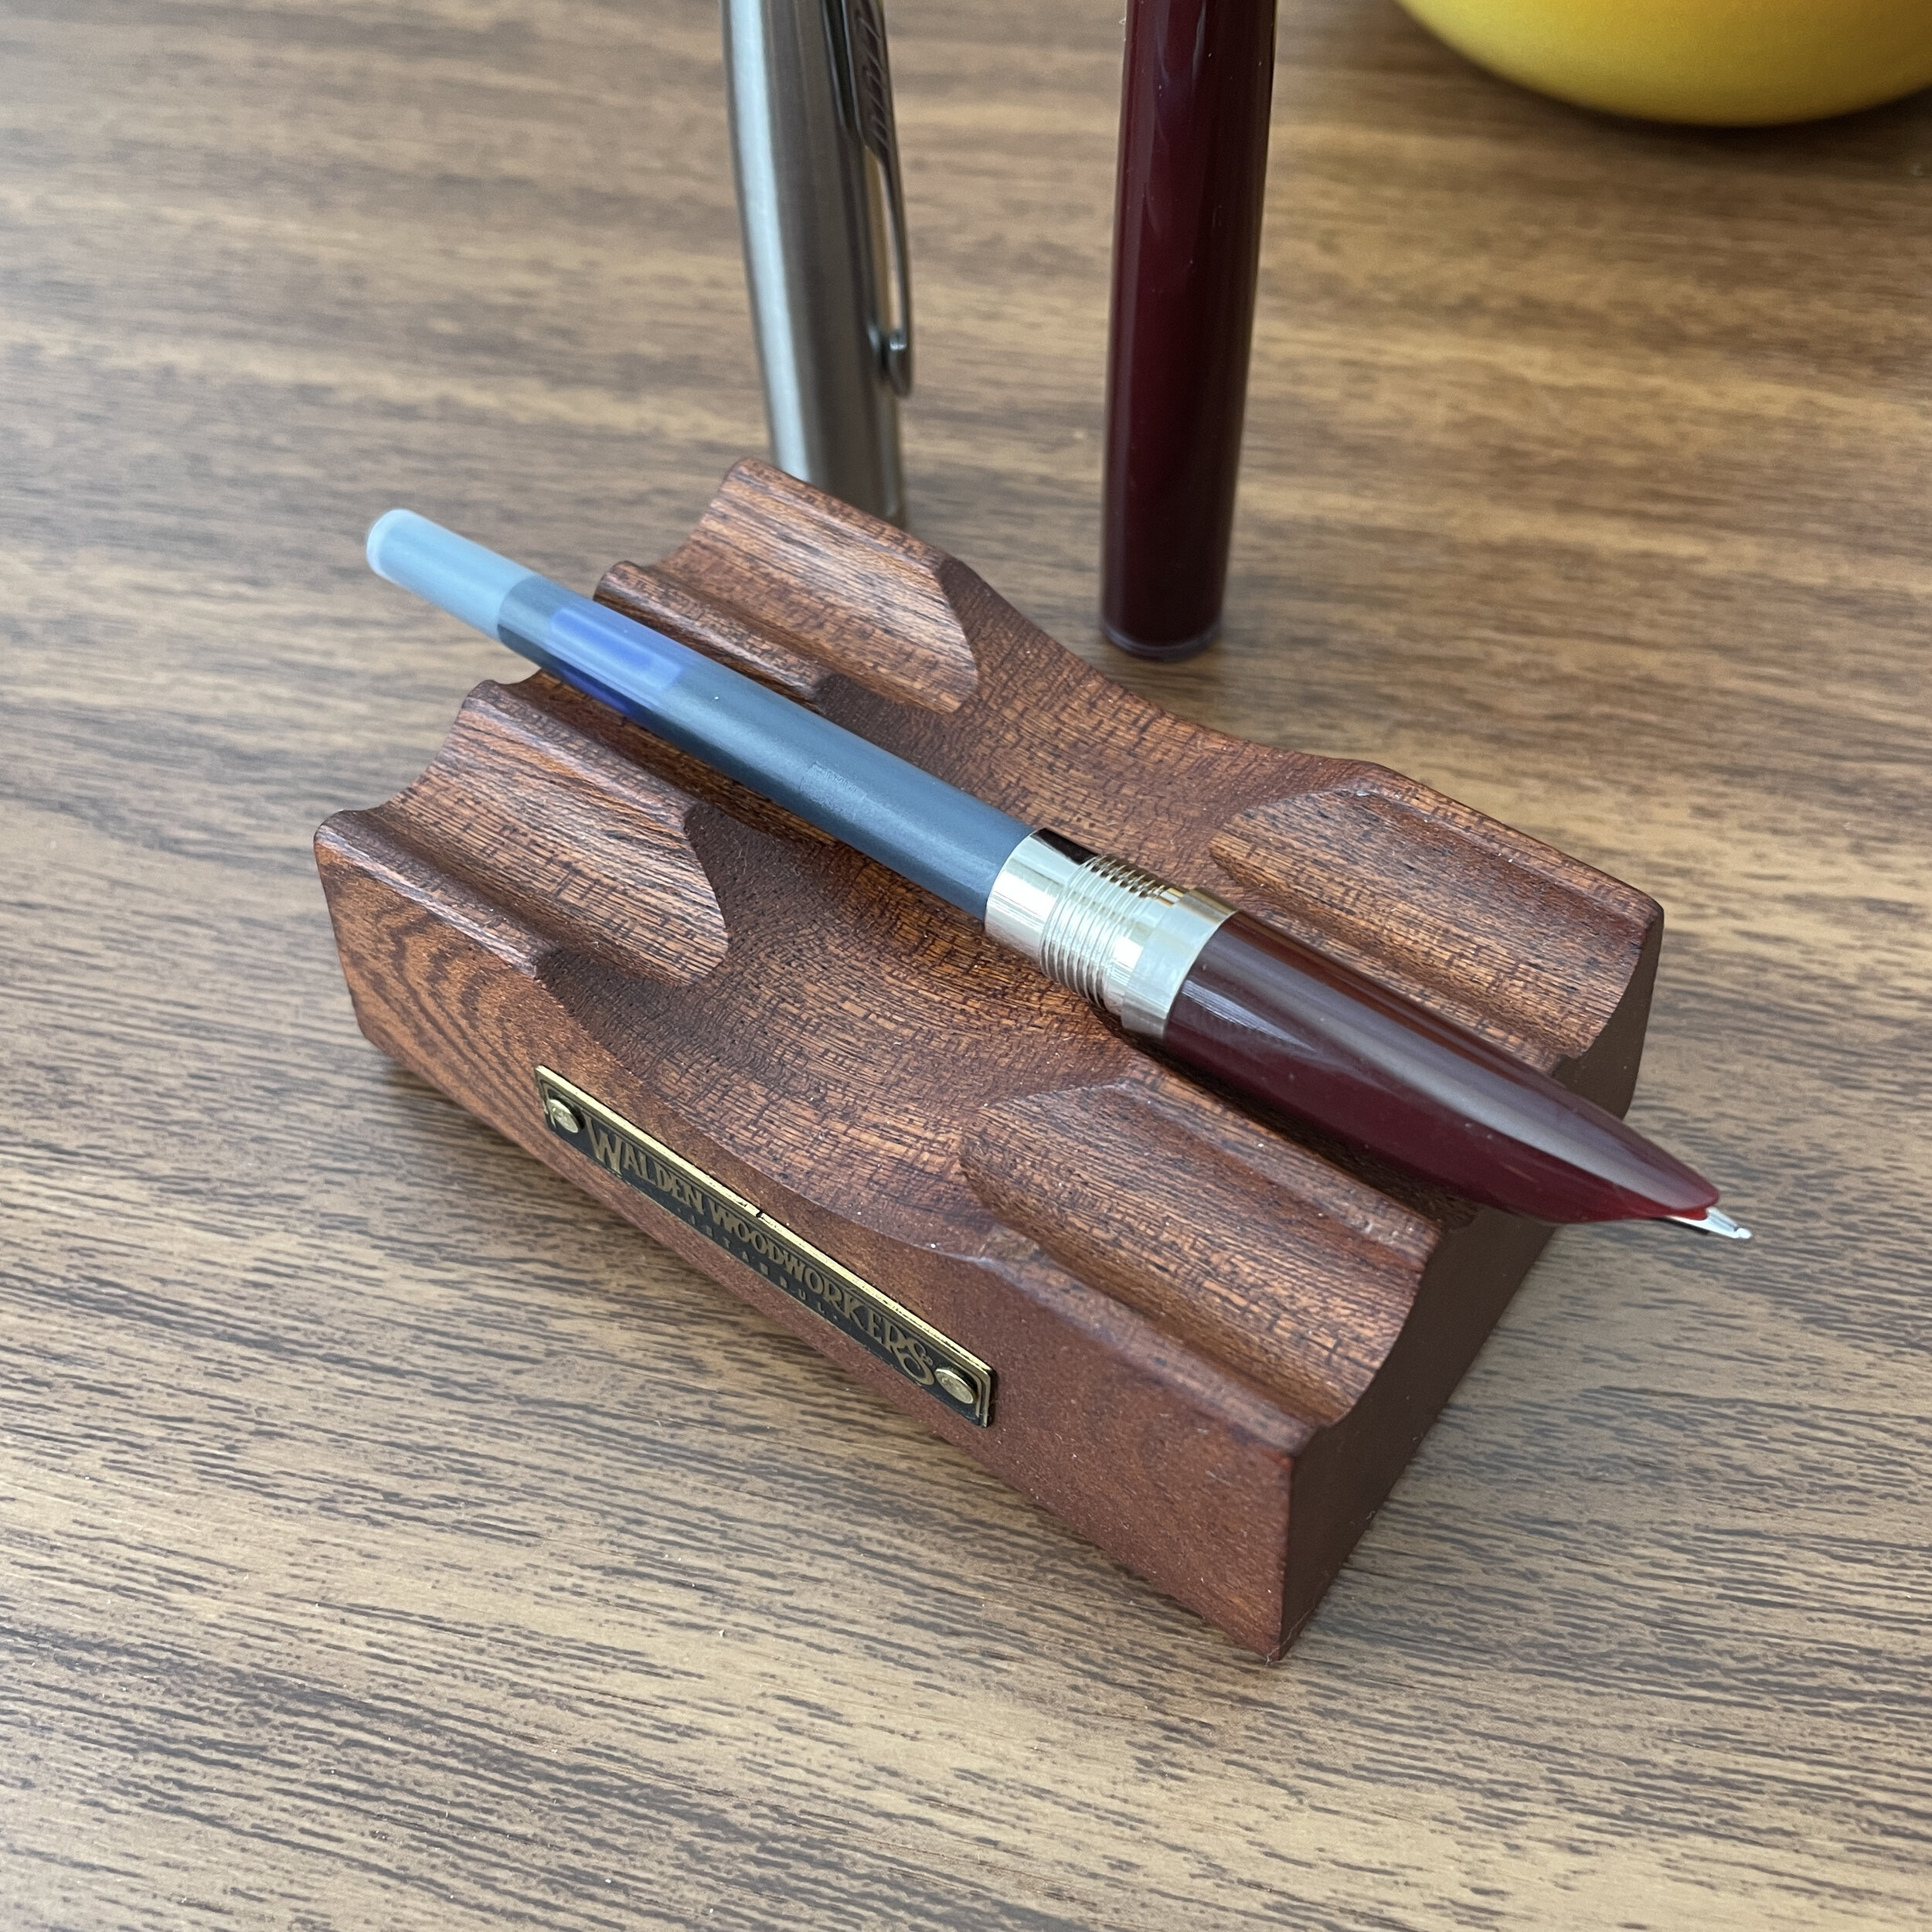 First Impressions: Hands On with the New Parker 51 Fountain Pen — The  Gentleman Stationer